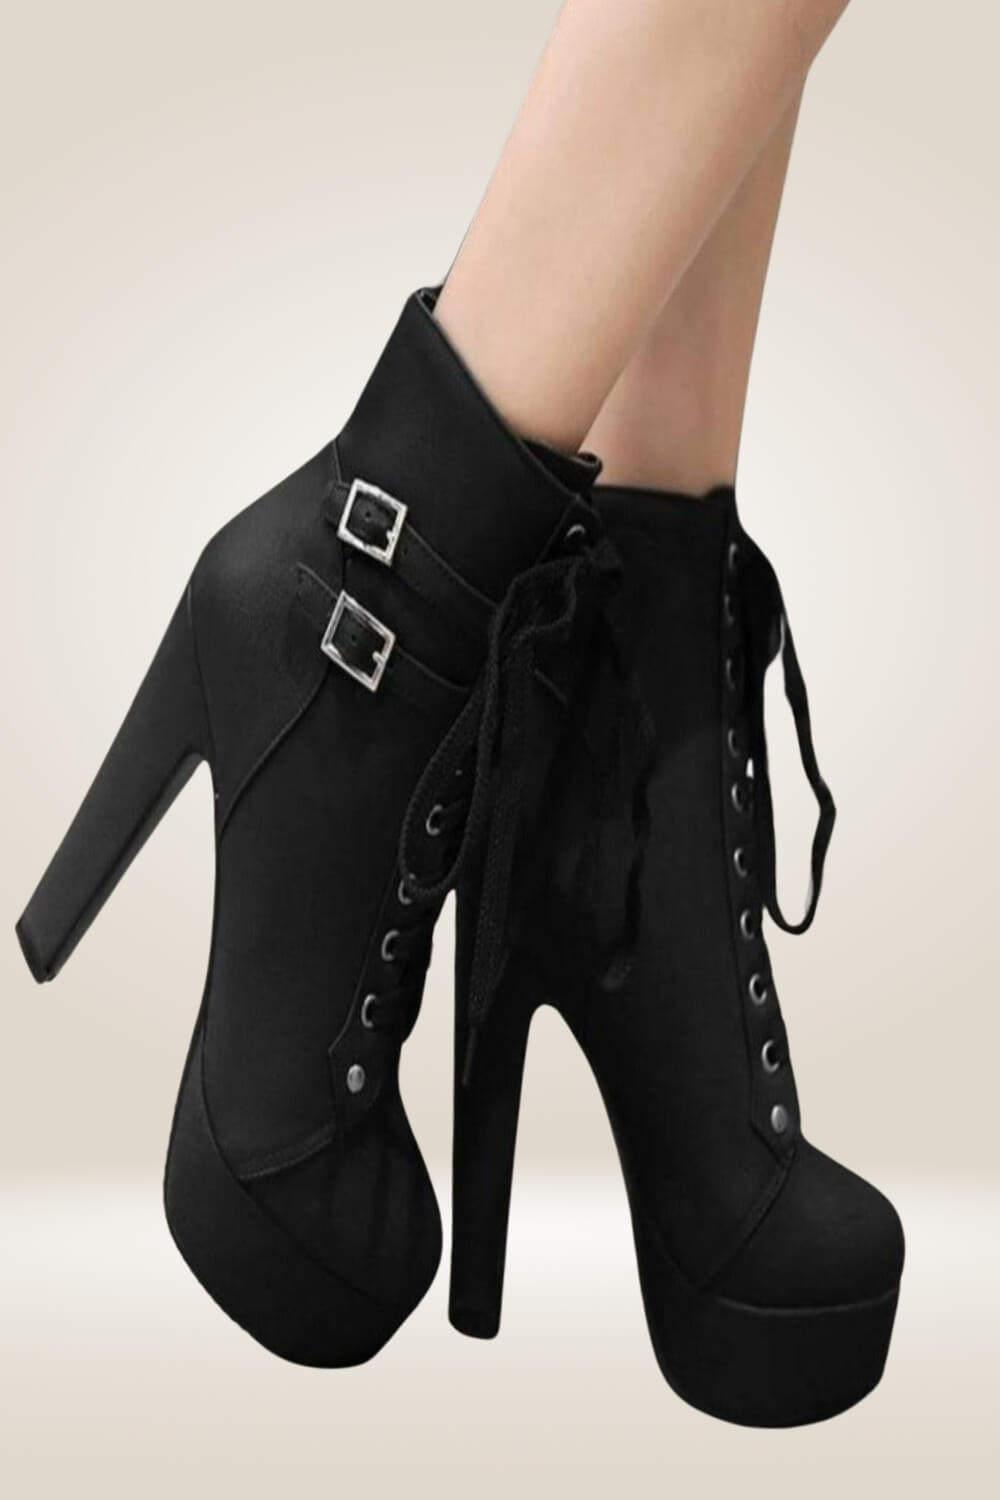 Black Lace-Up Boots - Chunky Platform Boots - Mid-Calf Boots - Lulus